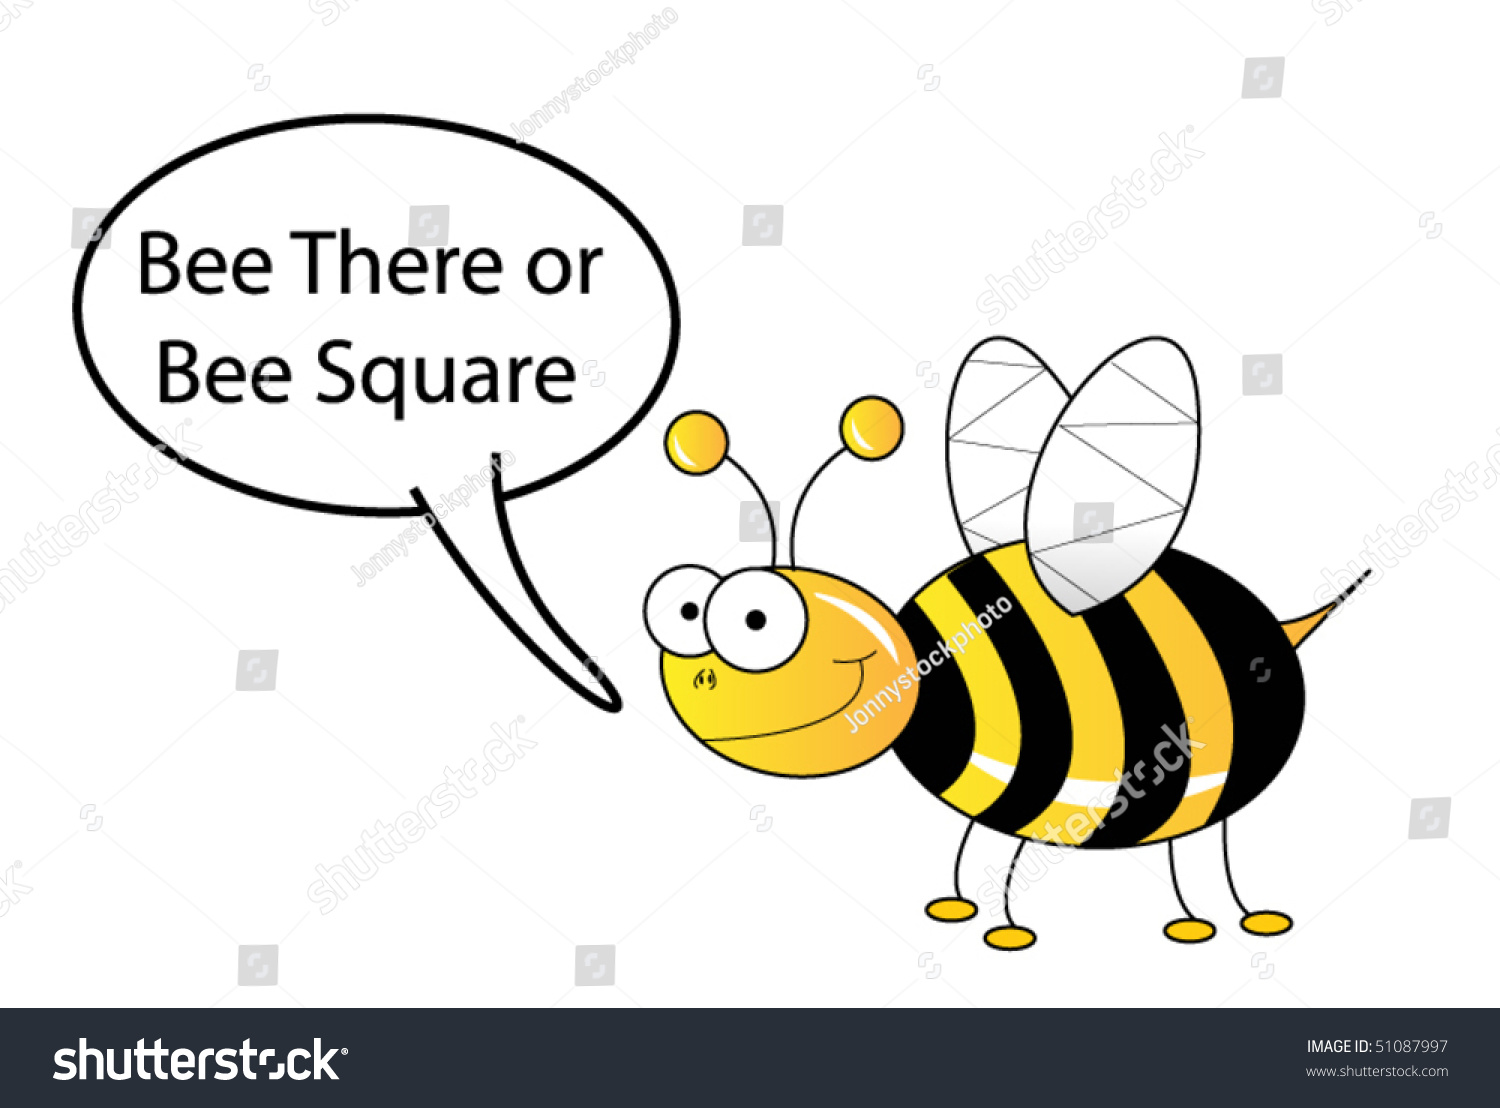 stock-vector-bee-there-or-bee-square-510